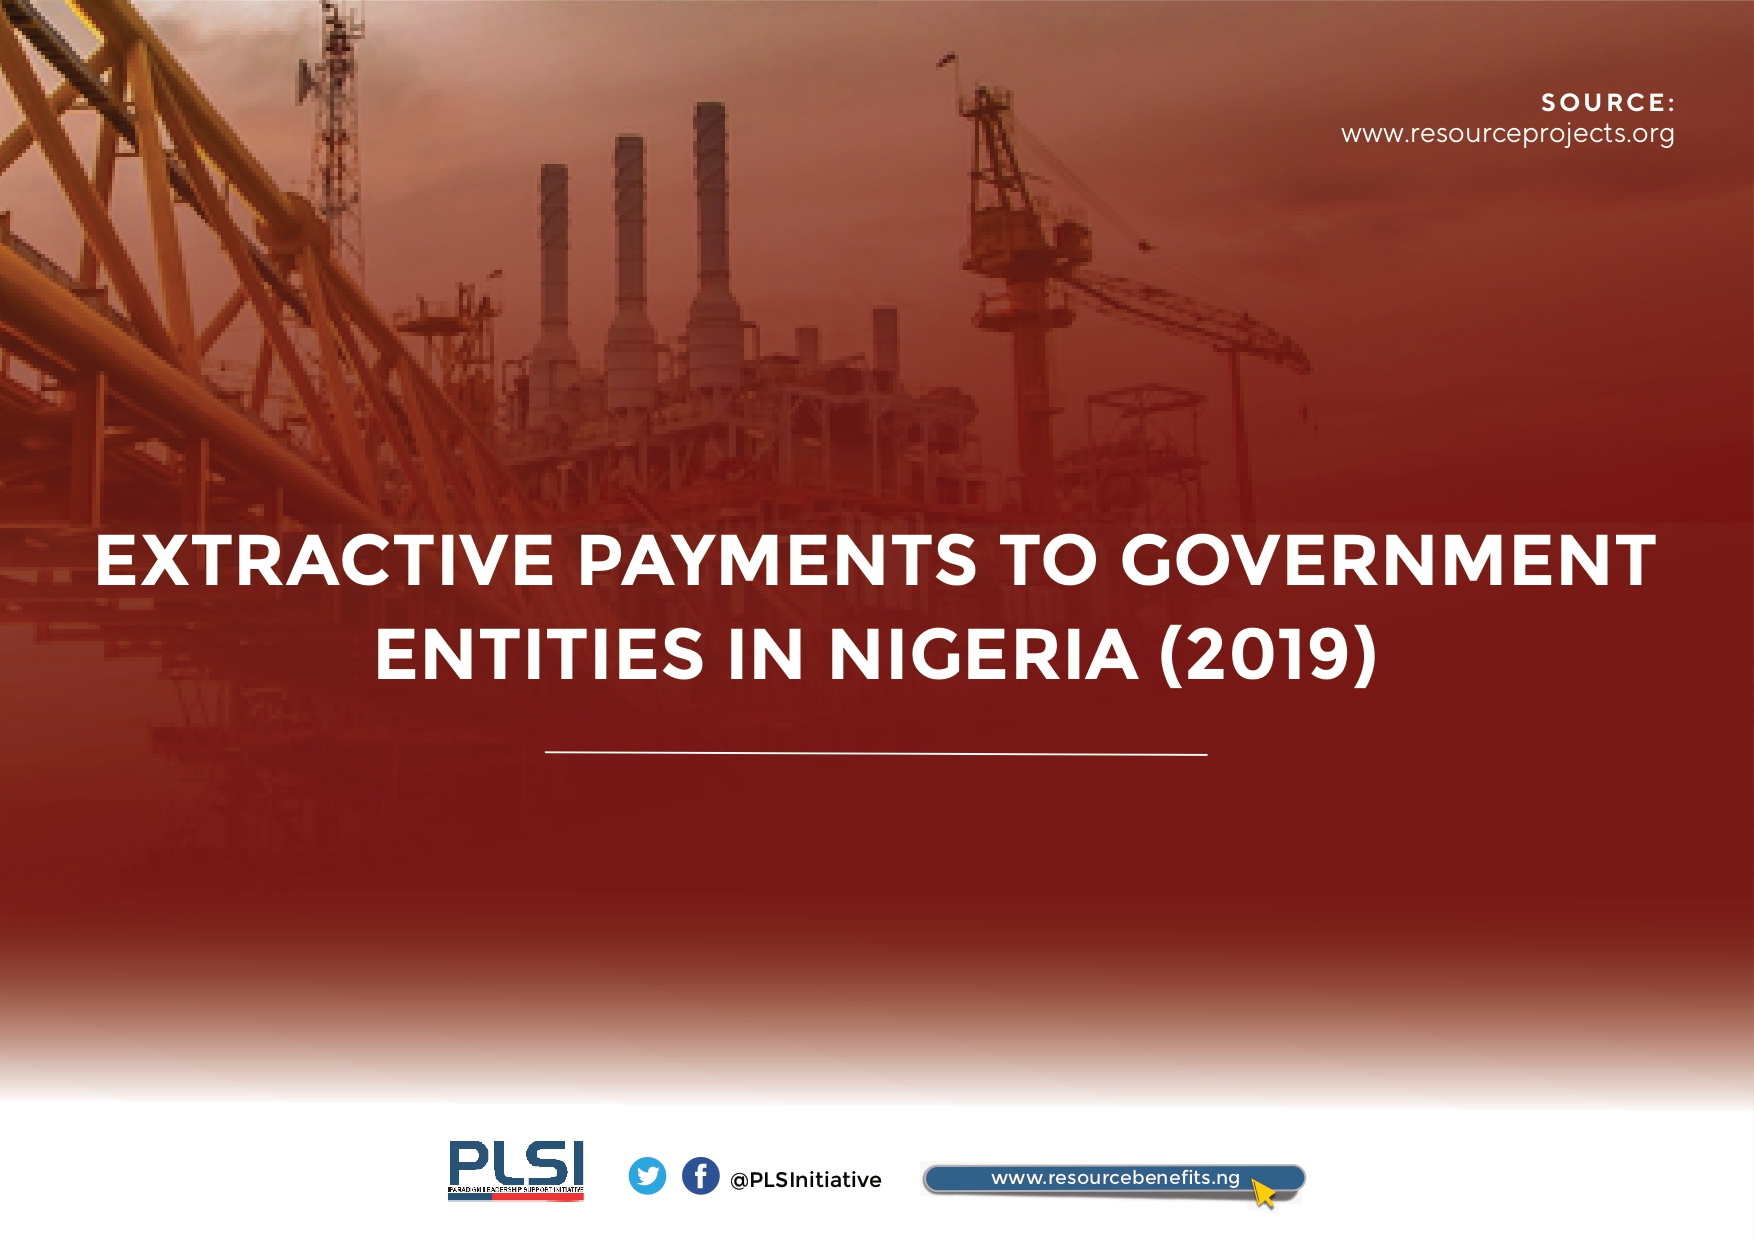 2019 Extractive Payments